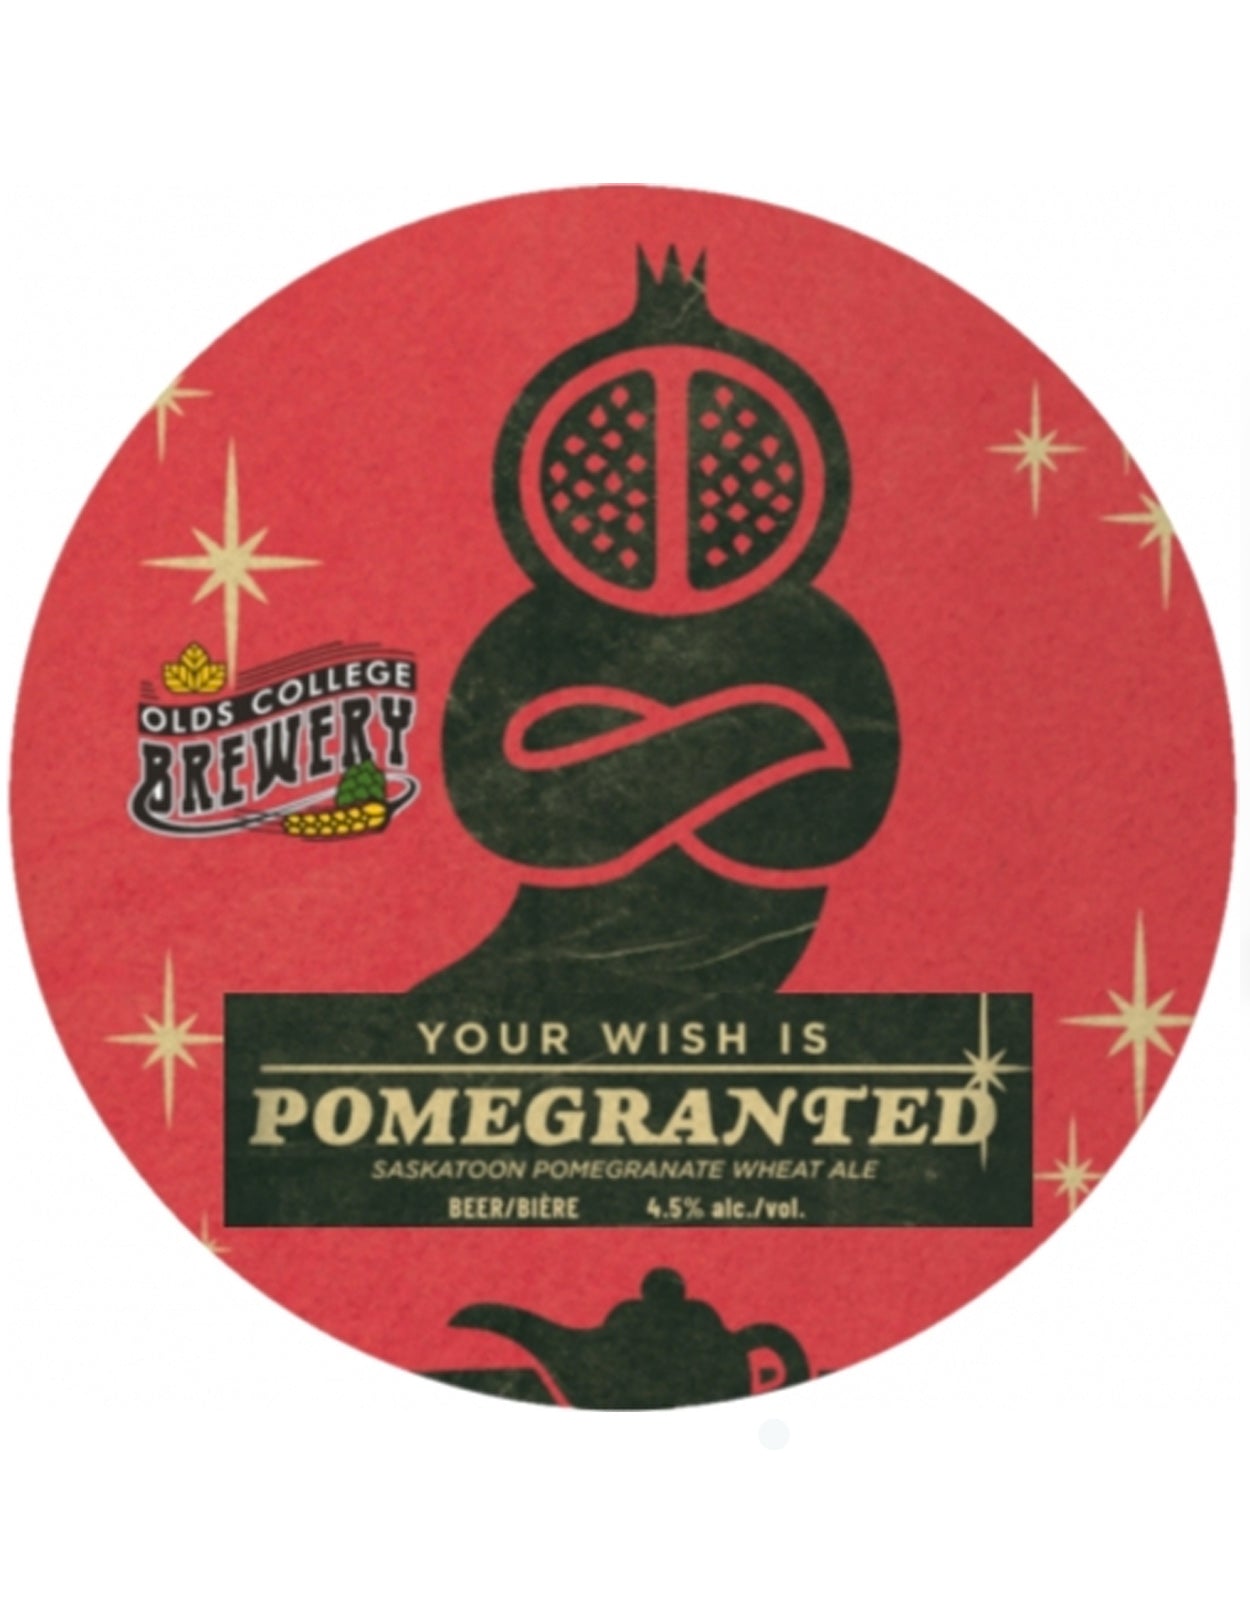 Olds College Brewery Your Wish Is Pomegranted Saskatoon Wheat Ale 473 ml - 4 Cans